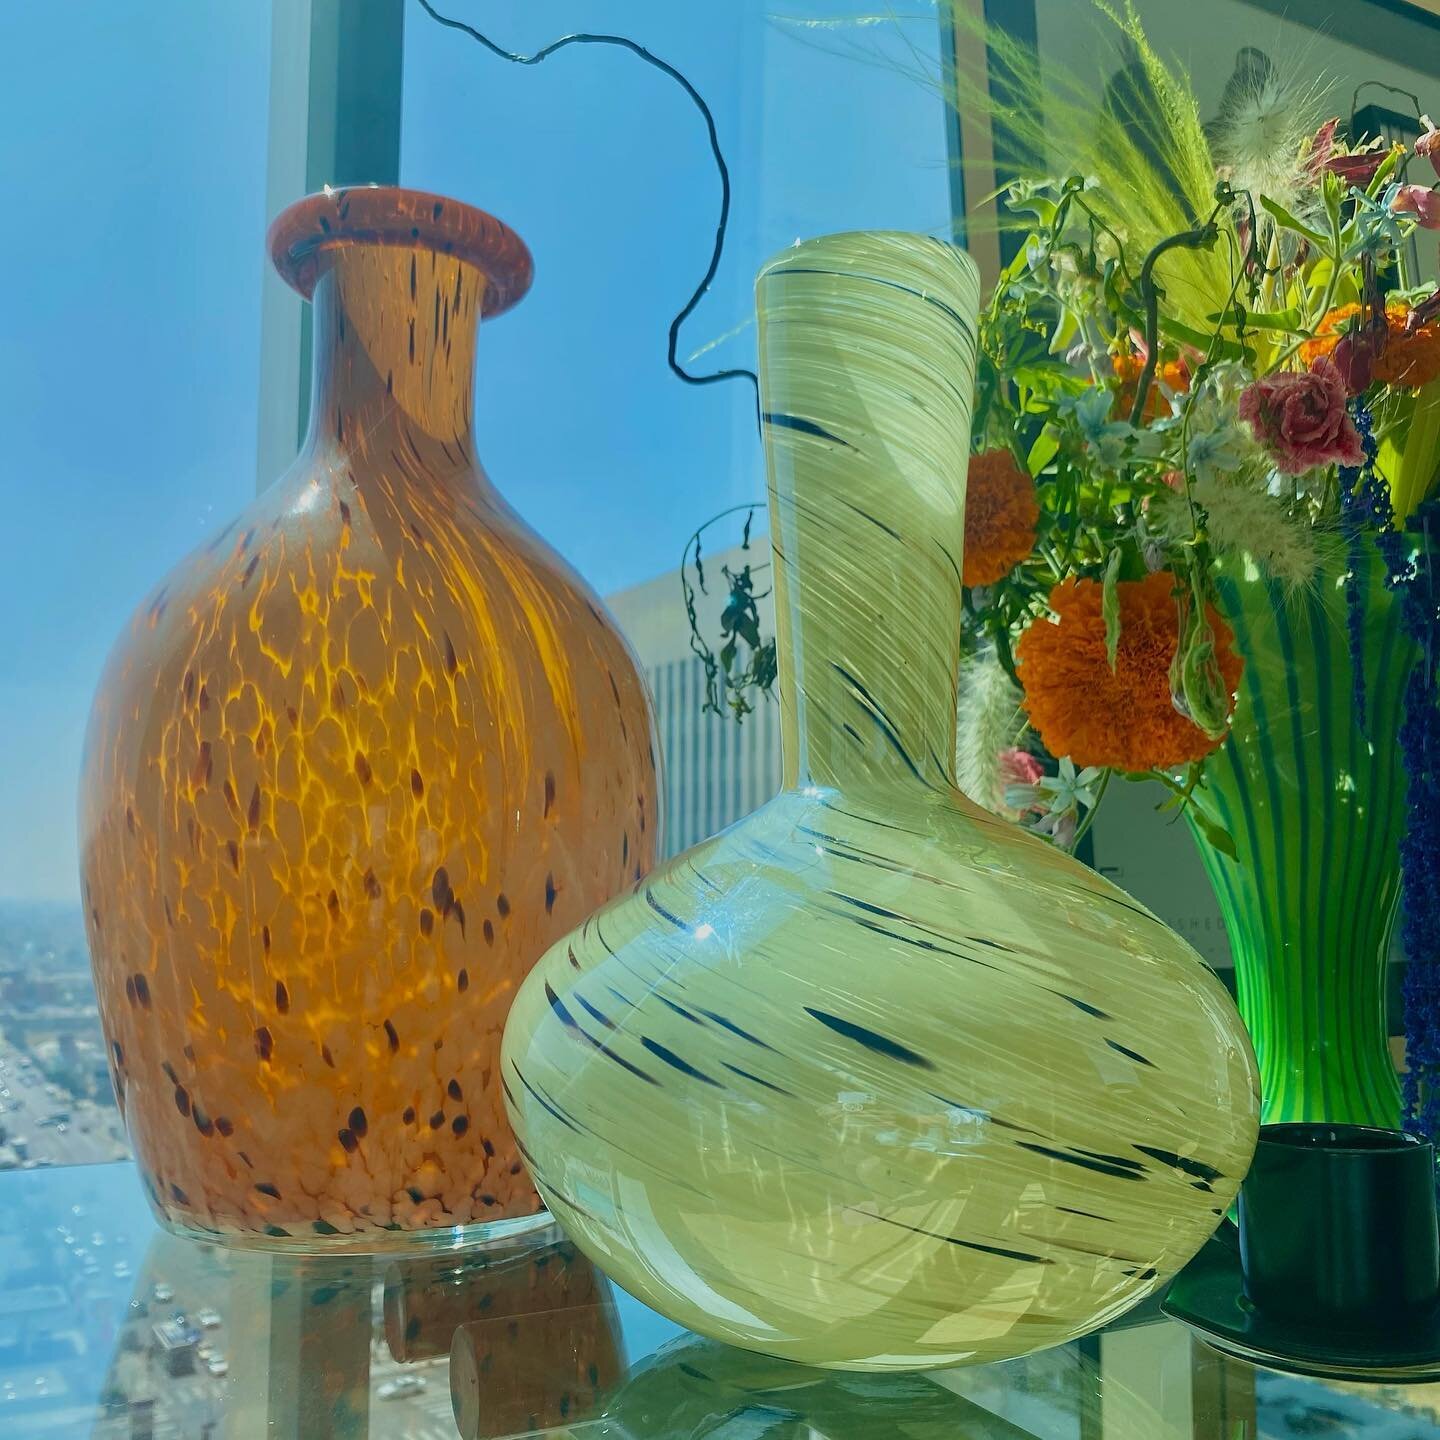 Gorgeous glass Murano style vases. Obsessed with the natural light coming through these colors 😍

Orange vase: $120
Green vase: $100
White vase: $85

Free pickup or delivery for a fee 

#muranostyle #vase #vintagevase #muranoglass #muranoisland #ven